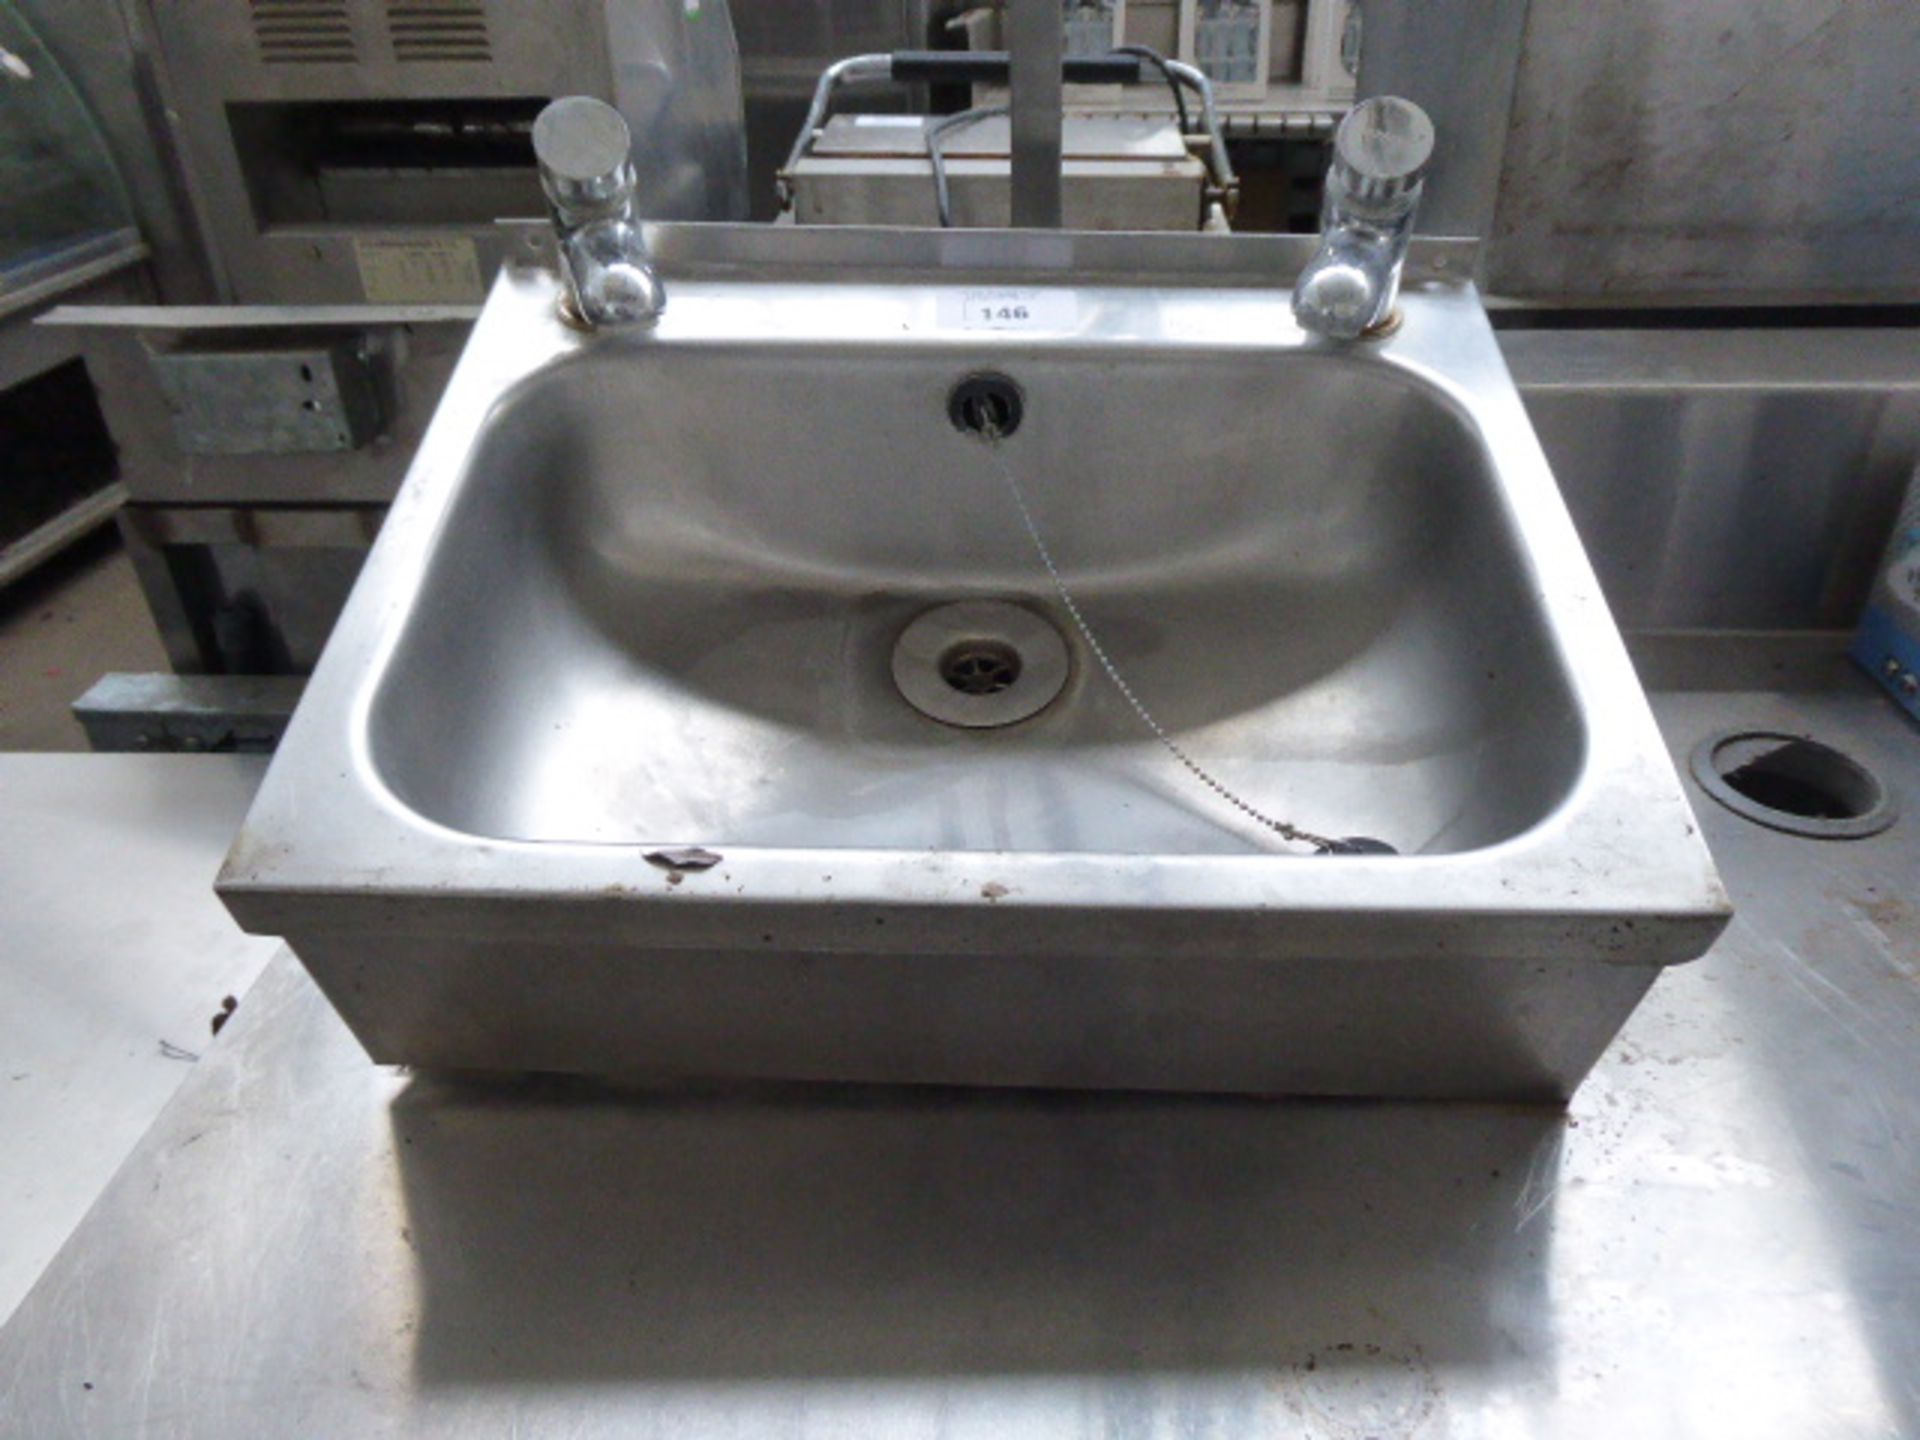 45cm stainless steel hand basin with tap set